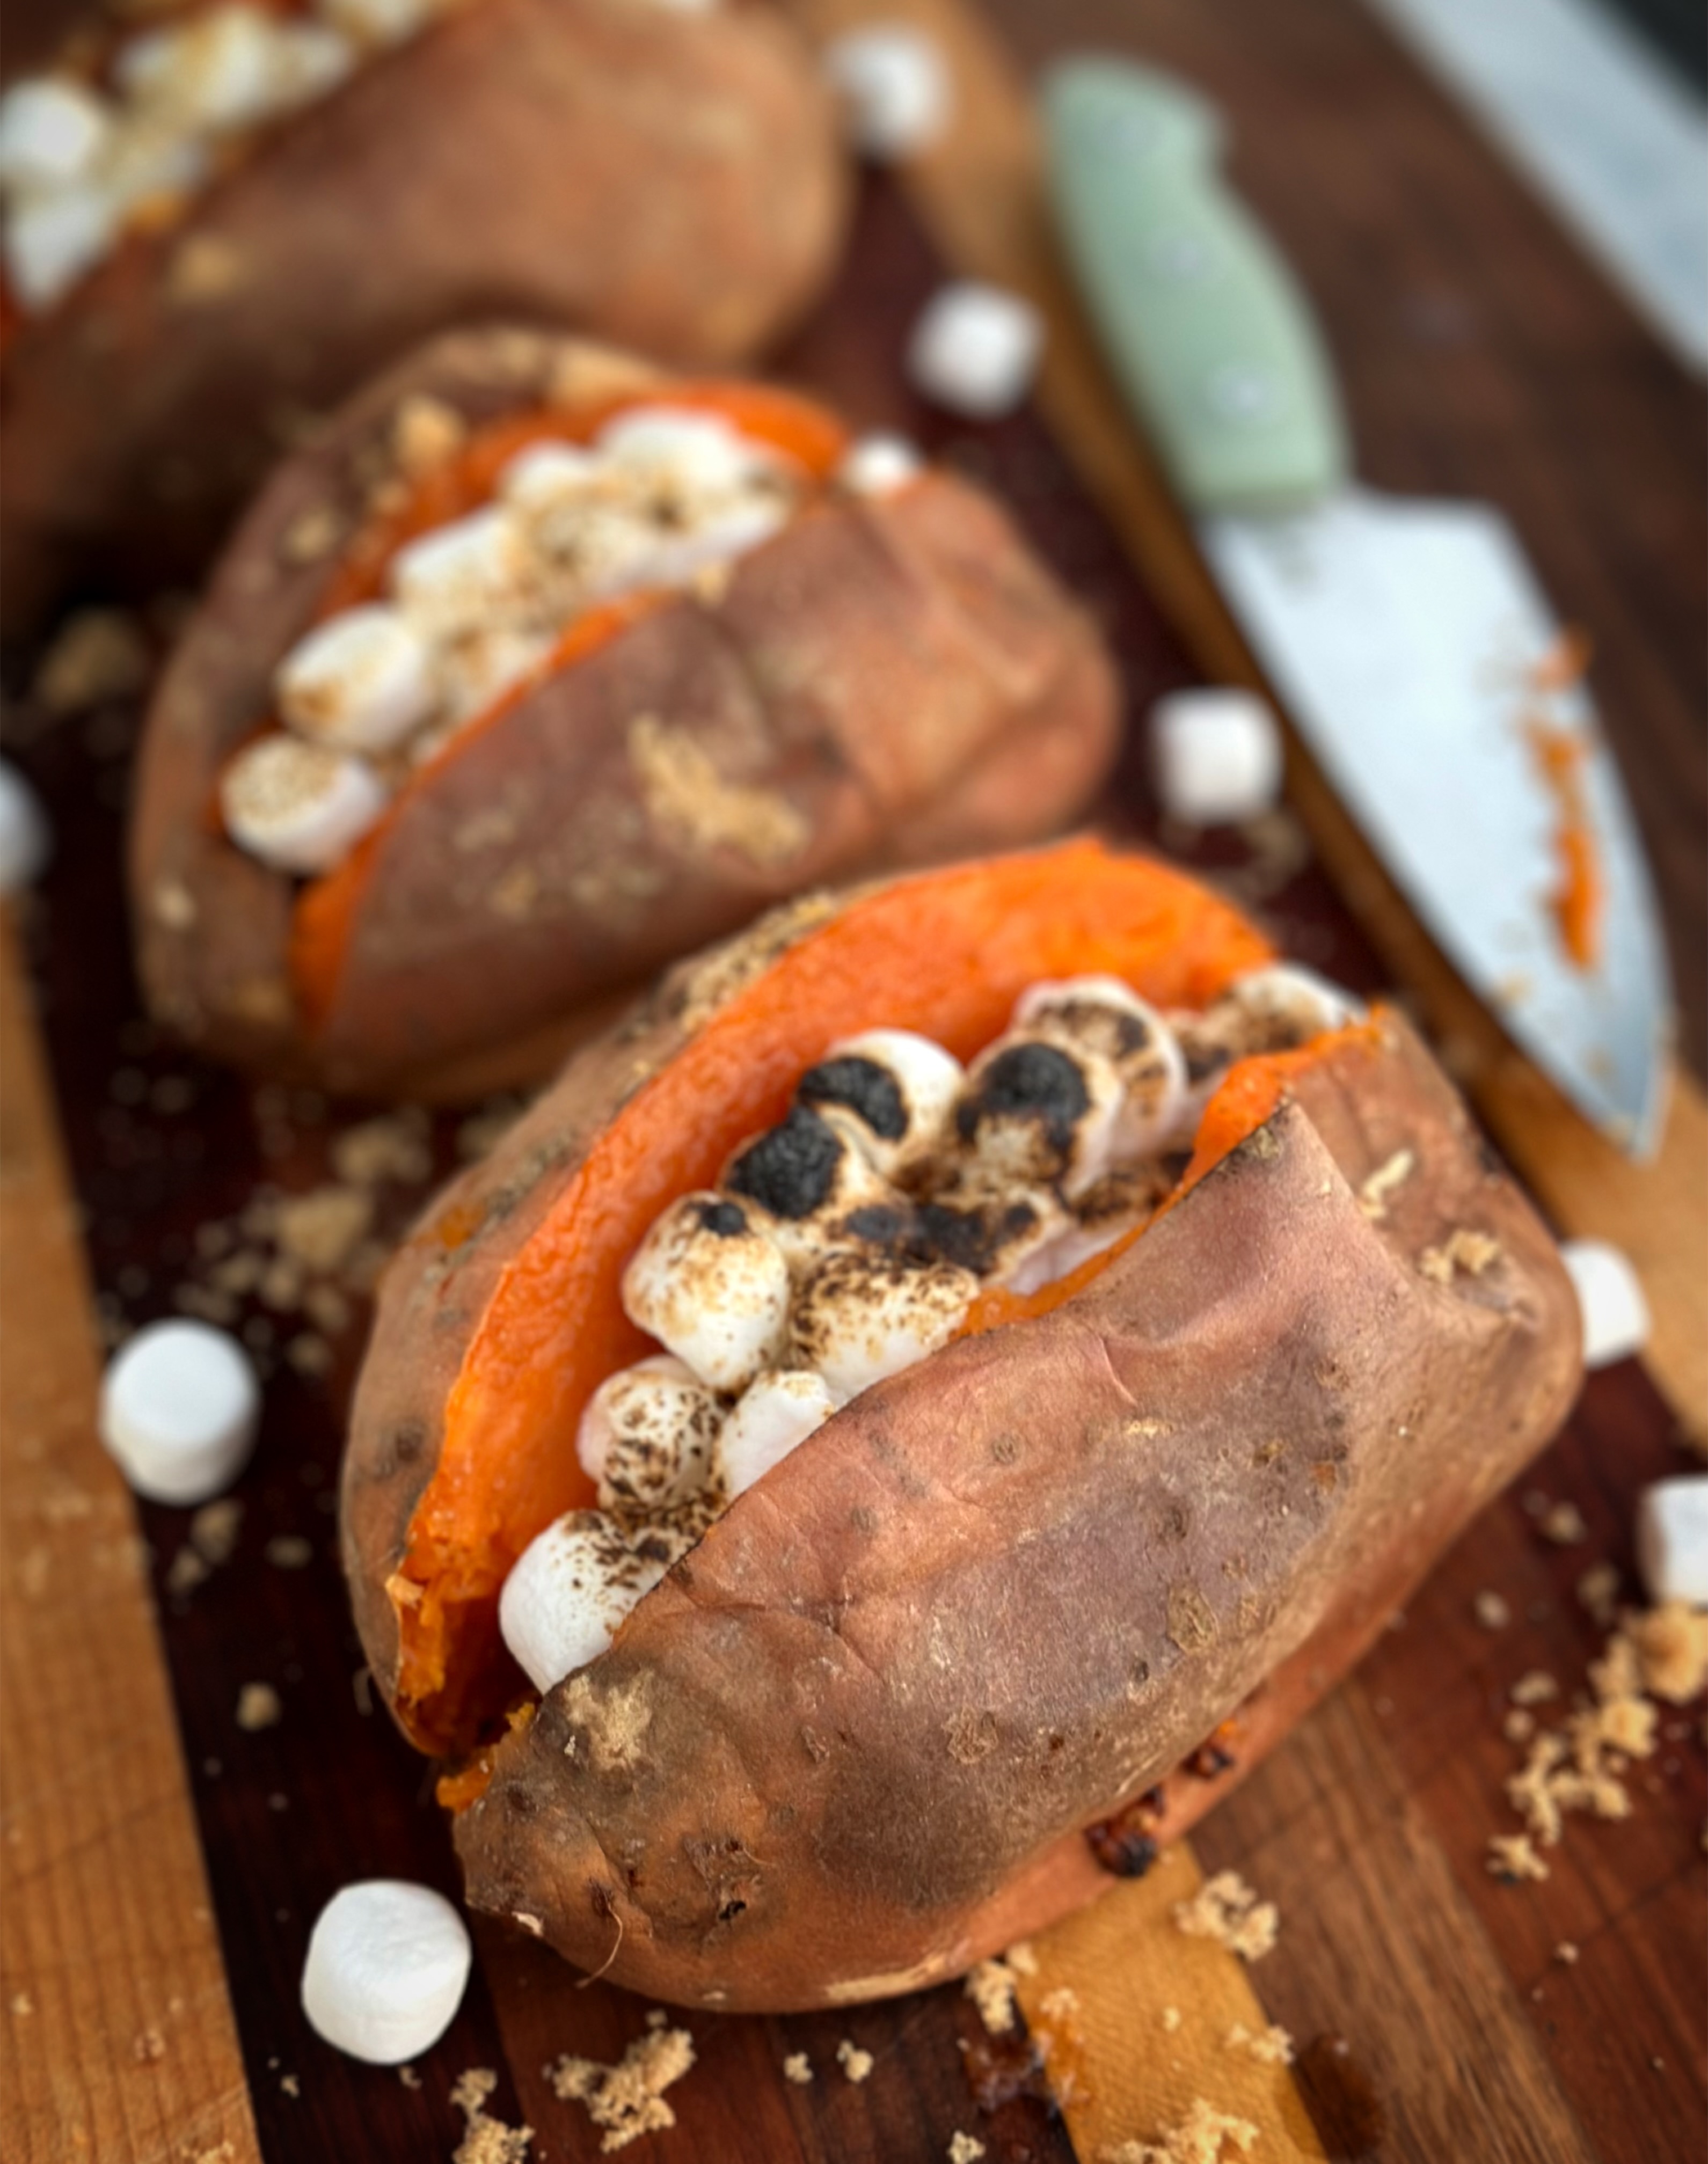 Grilled sweet potatoes are the perfect Thanksgiving side dish! Topped with toasted marshmallows in this image. 